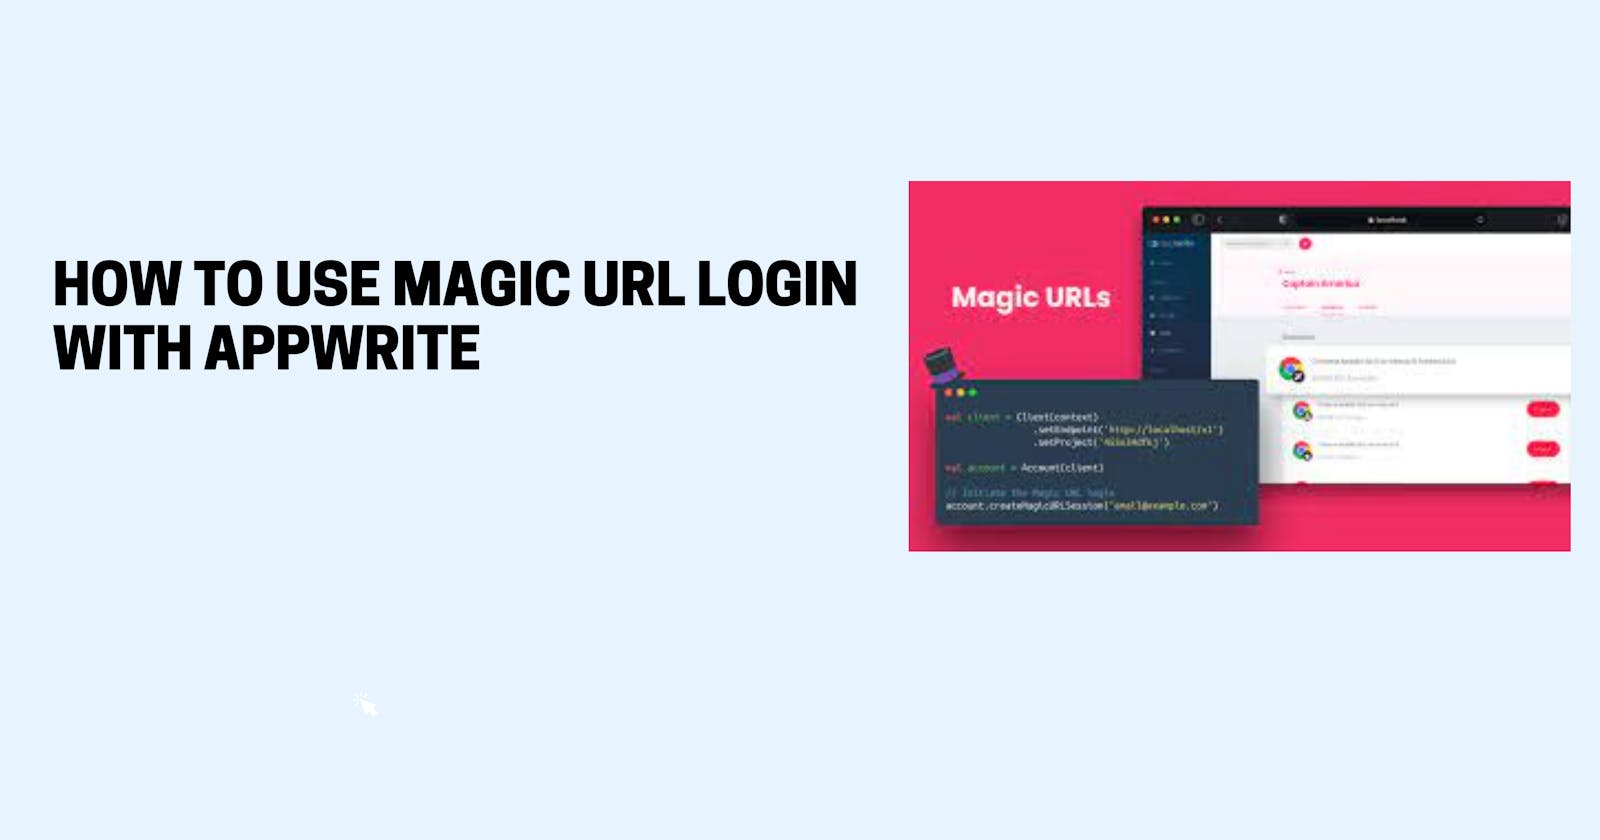 How to Use Magic URL Login with Appwrite